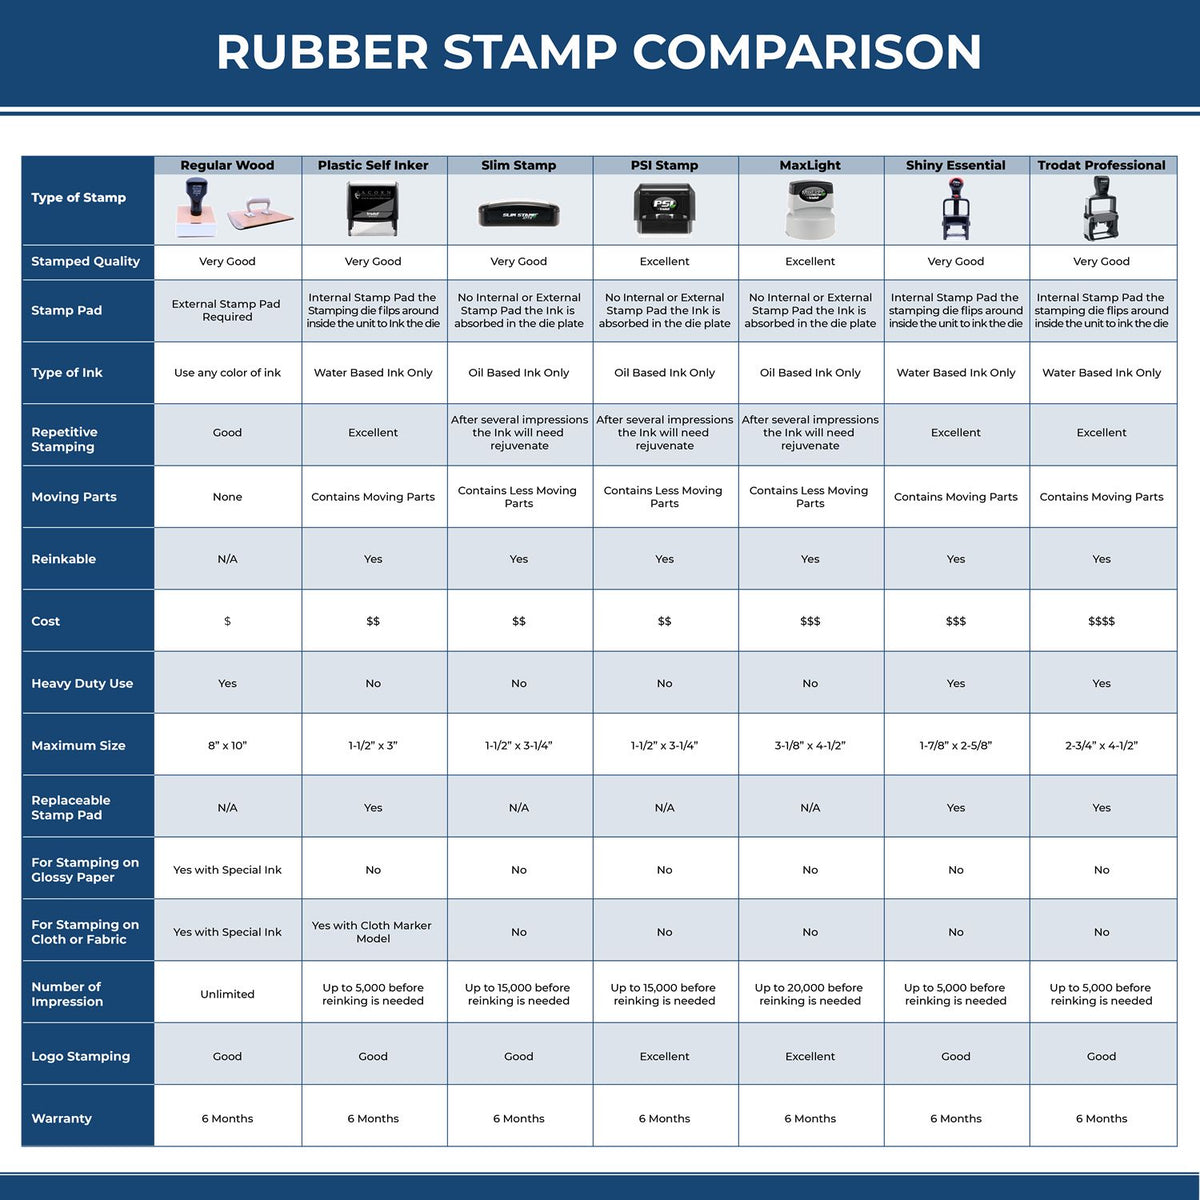 Large Restricted Area Rubber Stamp 5504R Rubber Stamp Comparison